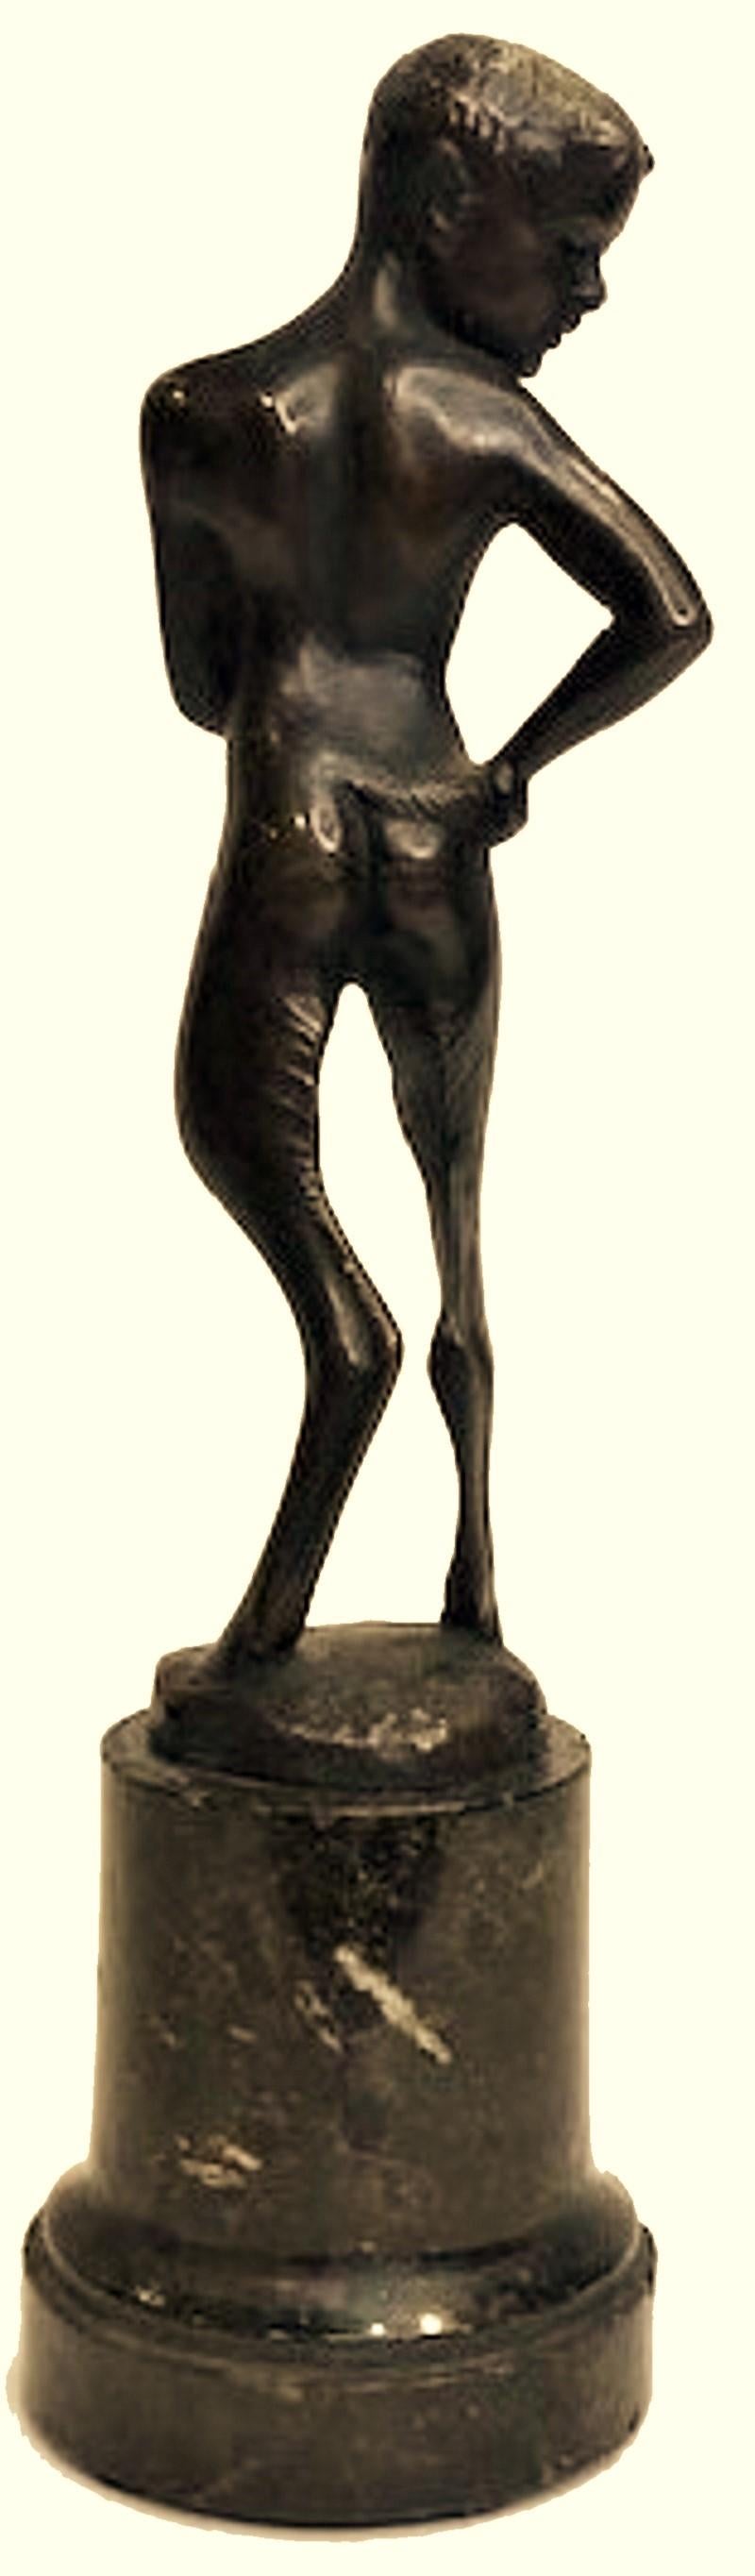 Austrian Jugenstil Patinated Bronze Sculpture of Fawn Youth, Ca. 1900 For Sale 4